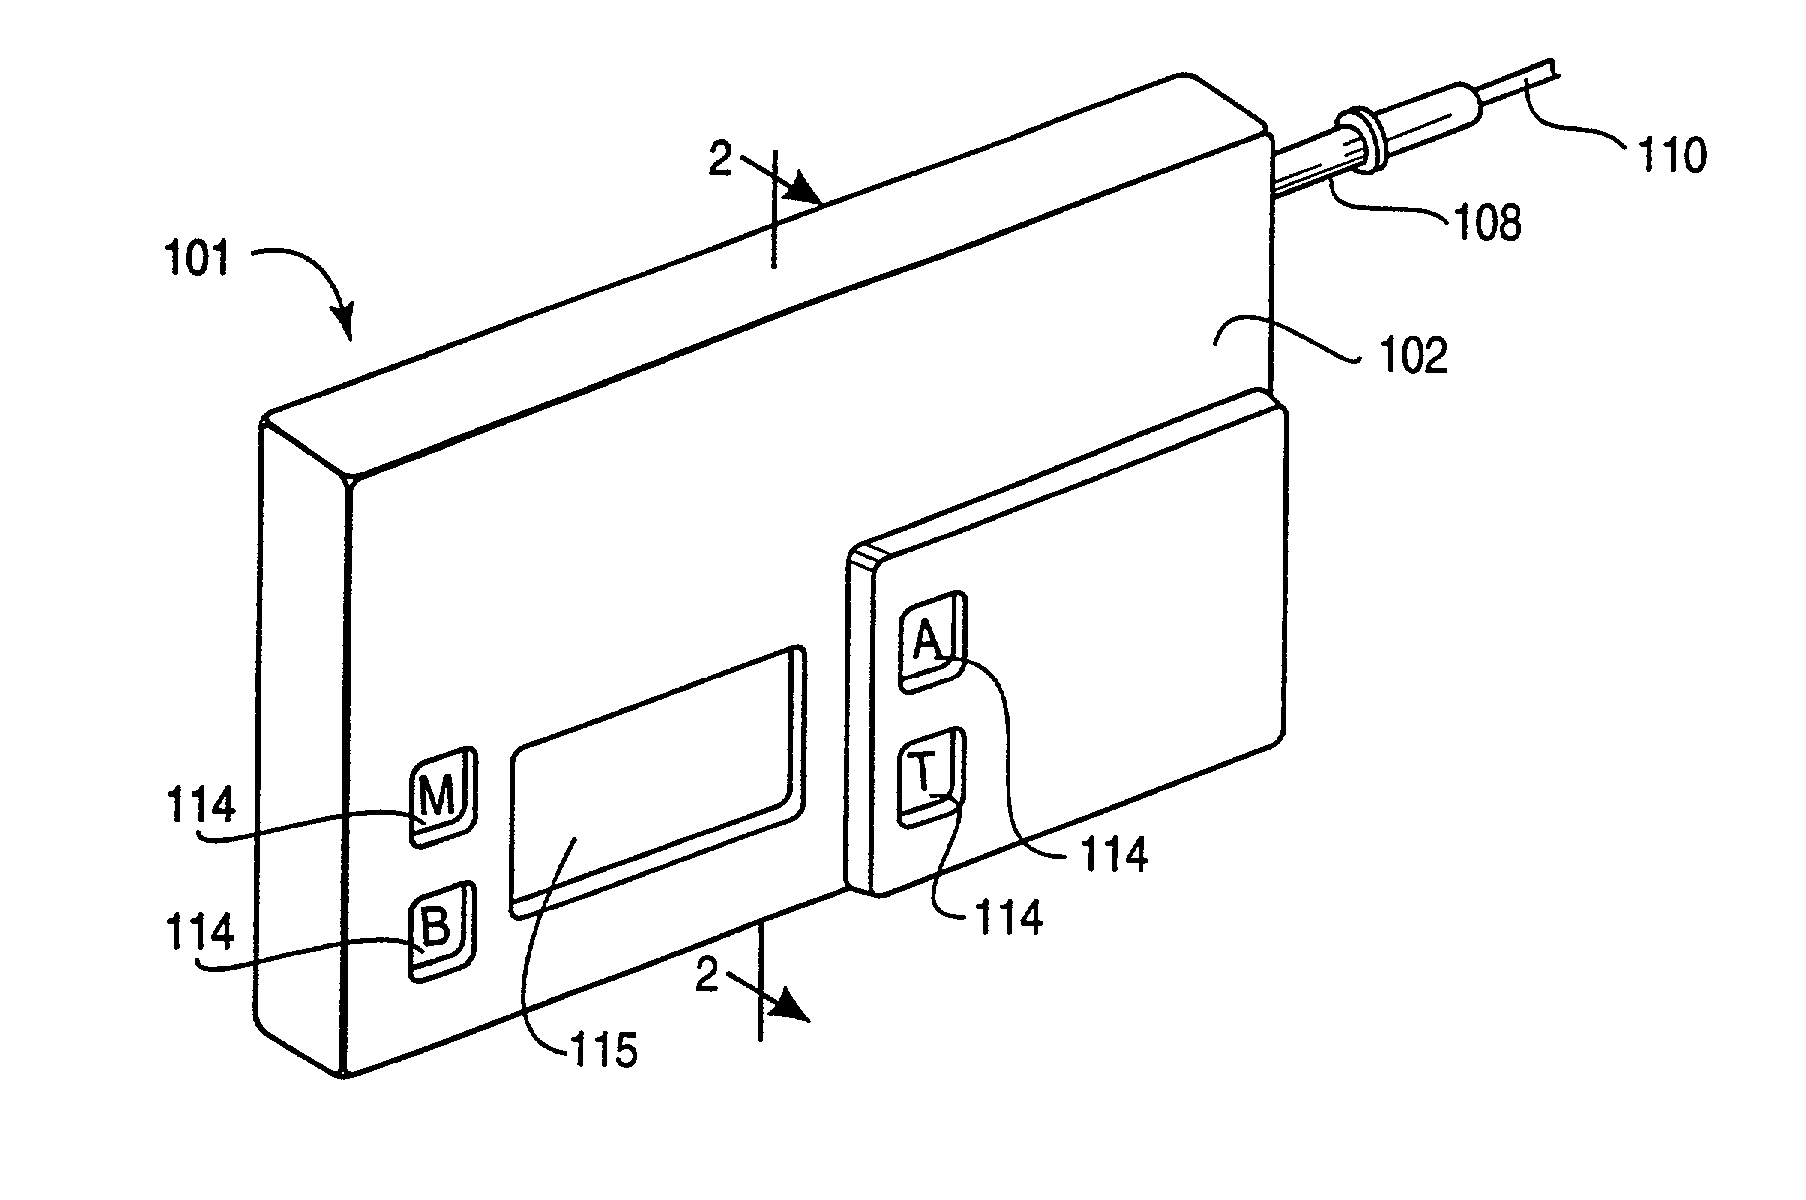 Method and apparatus for detection of occlusions